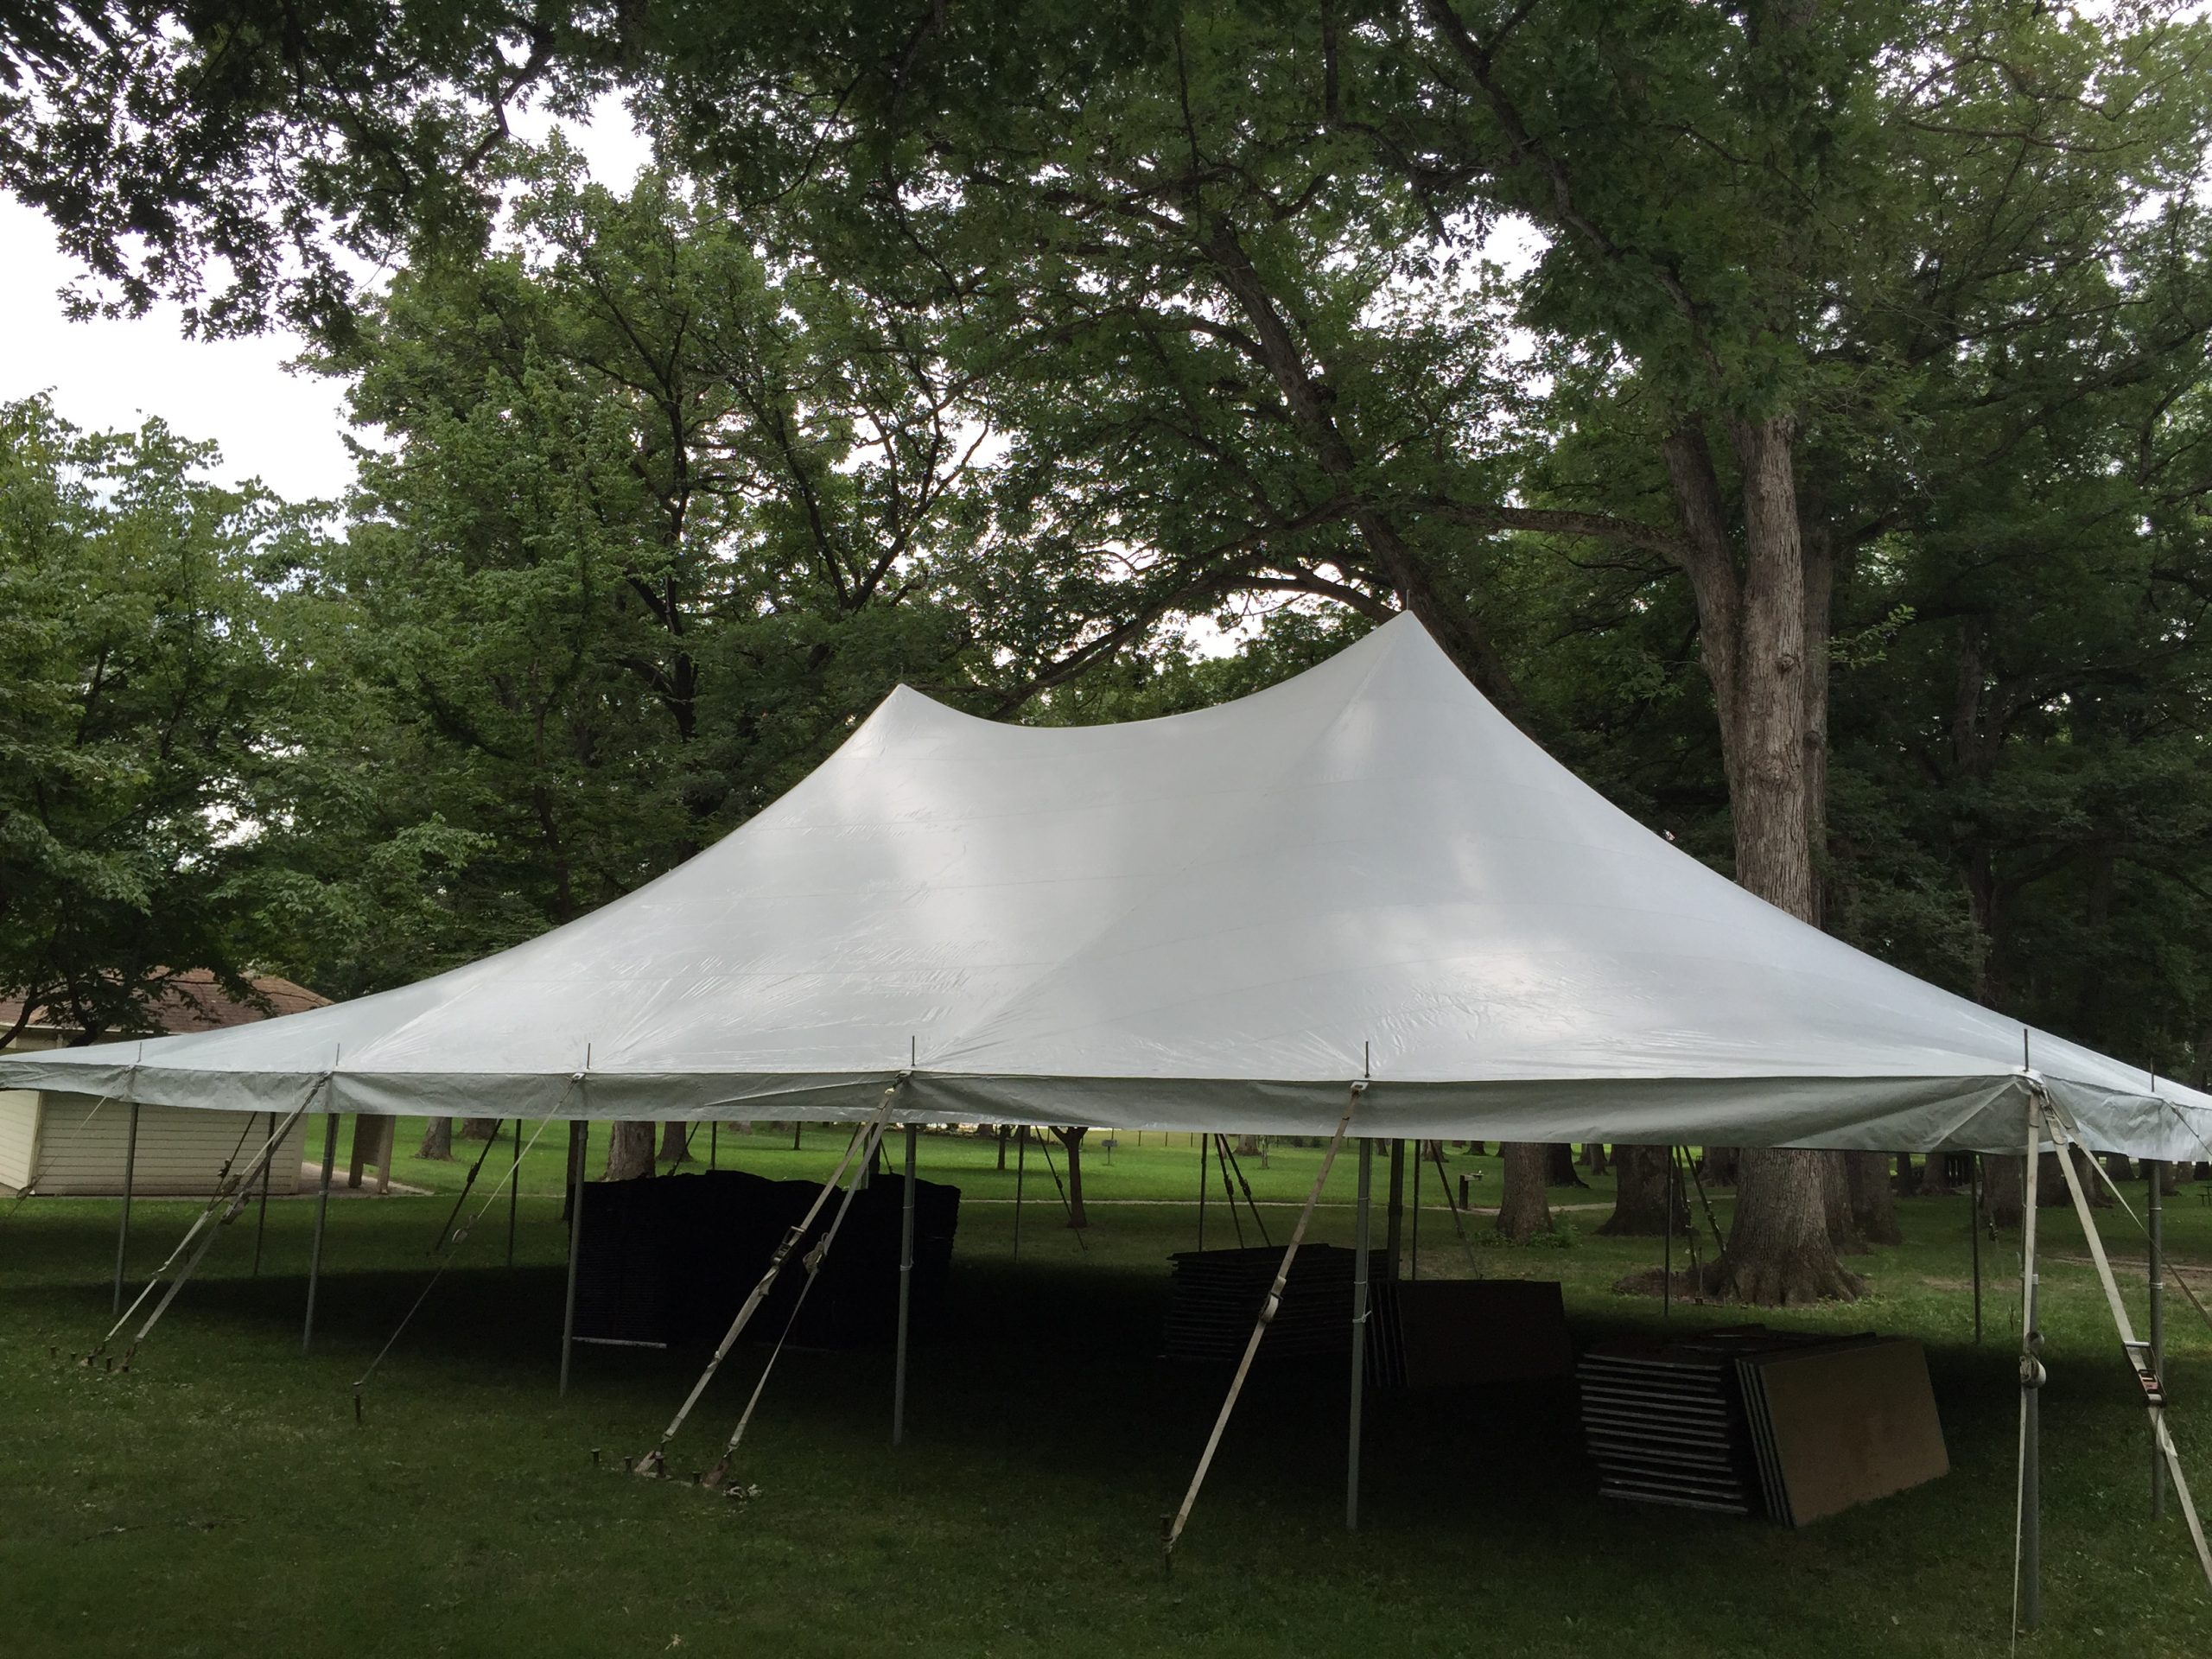 Tent for United National Foods company event